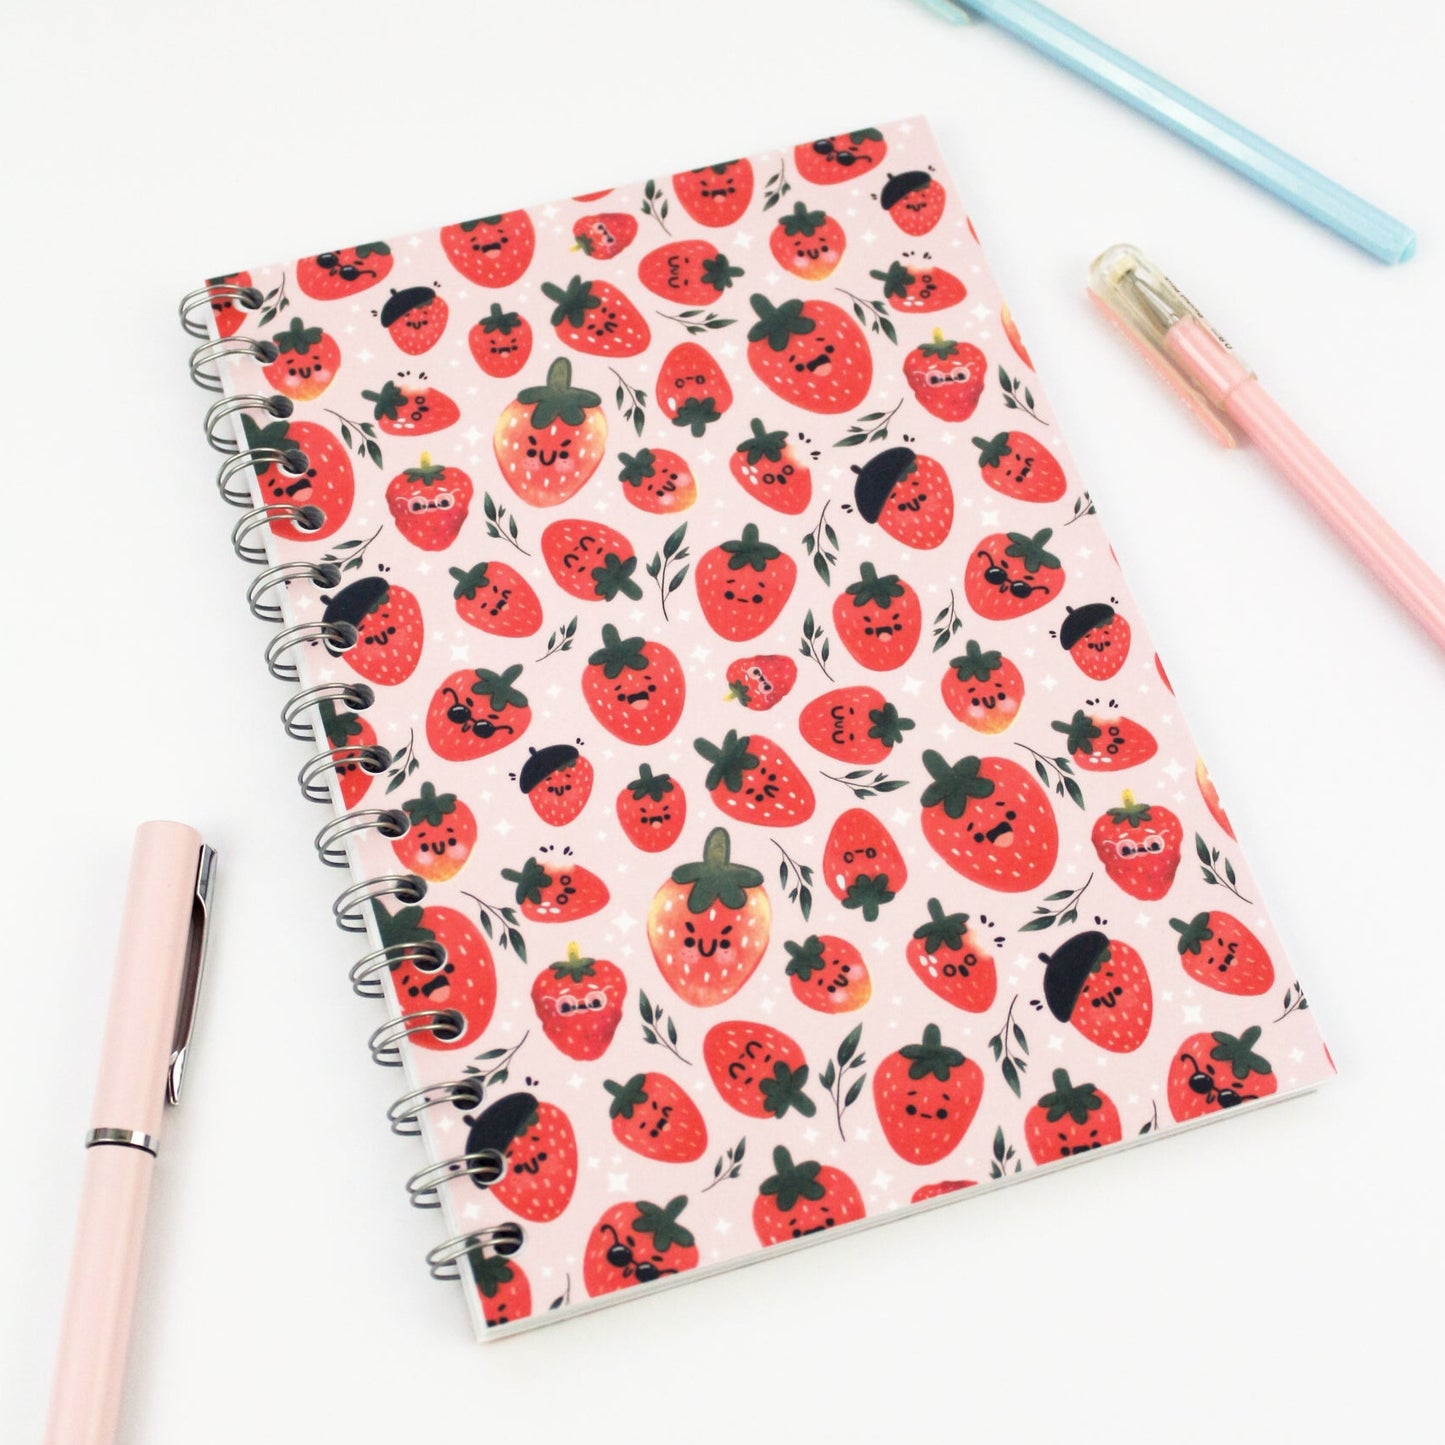 Strawberry Spiral Notebook - Cute back to school notebook